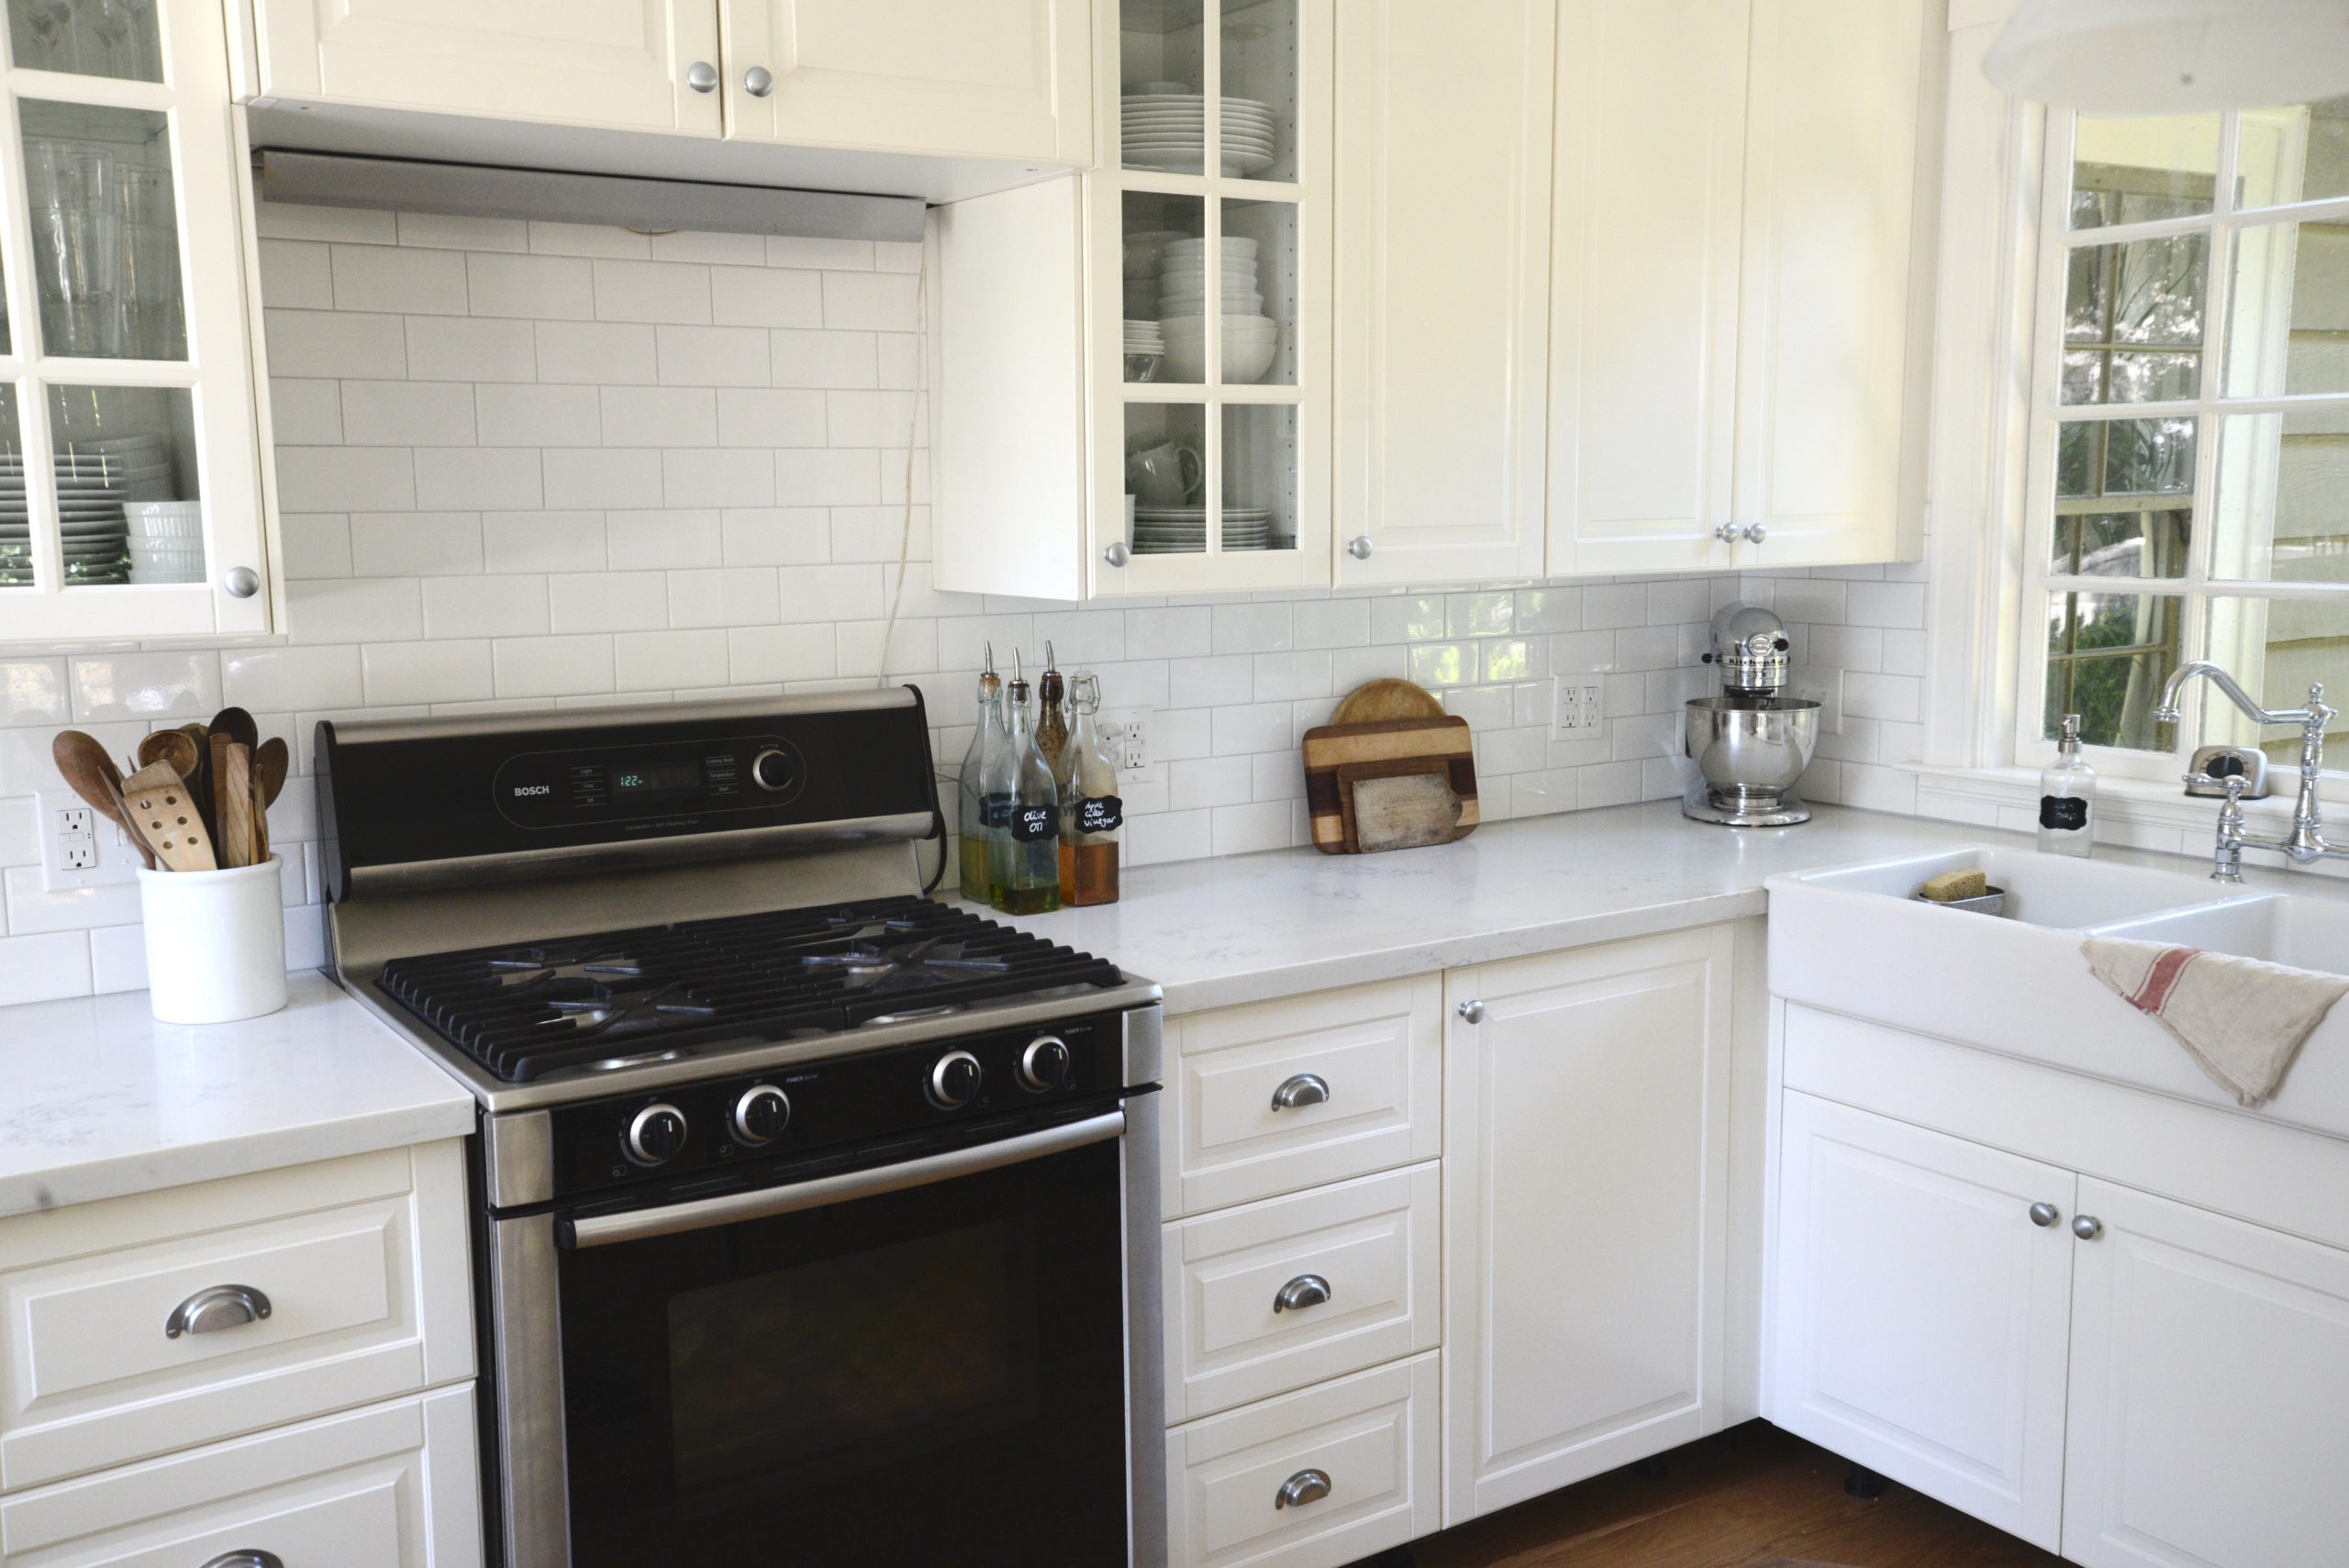 How to Completely Renovate an Old Farmhouse Kitchen